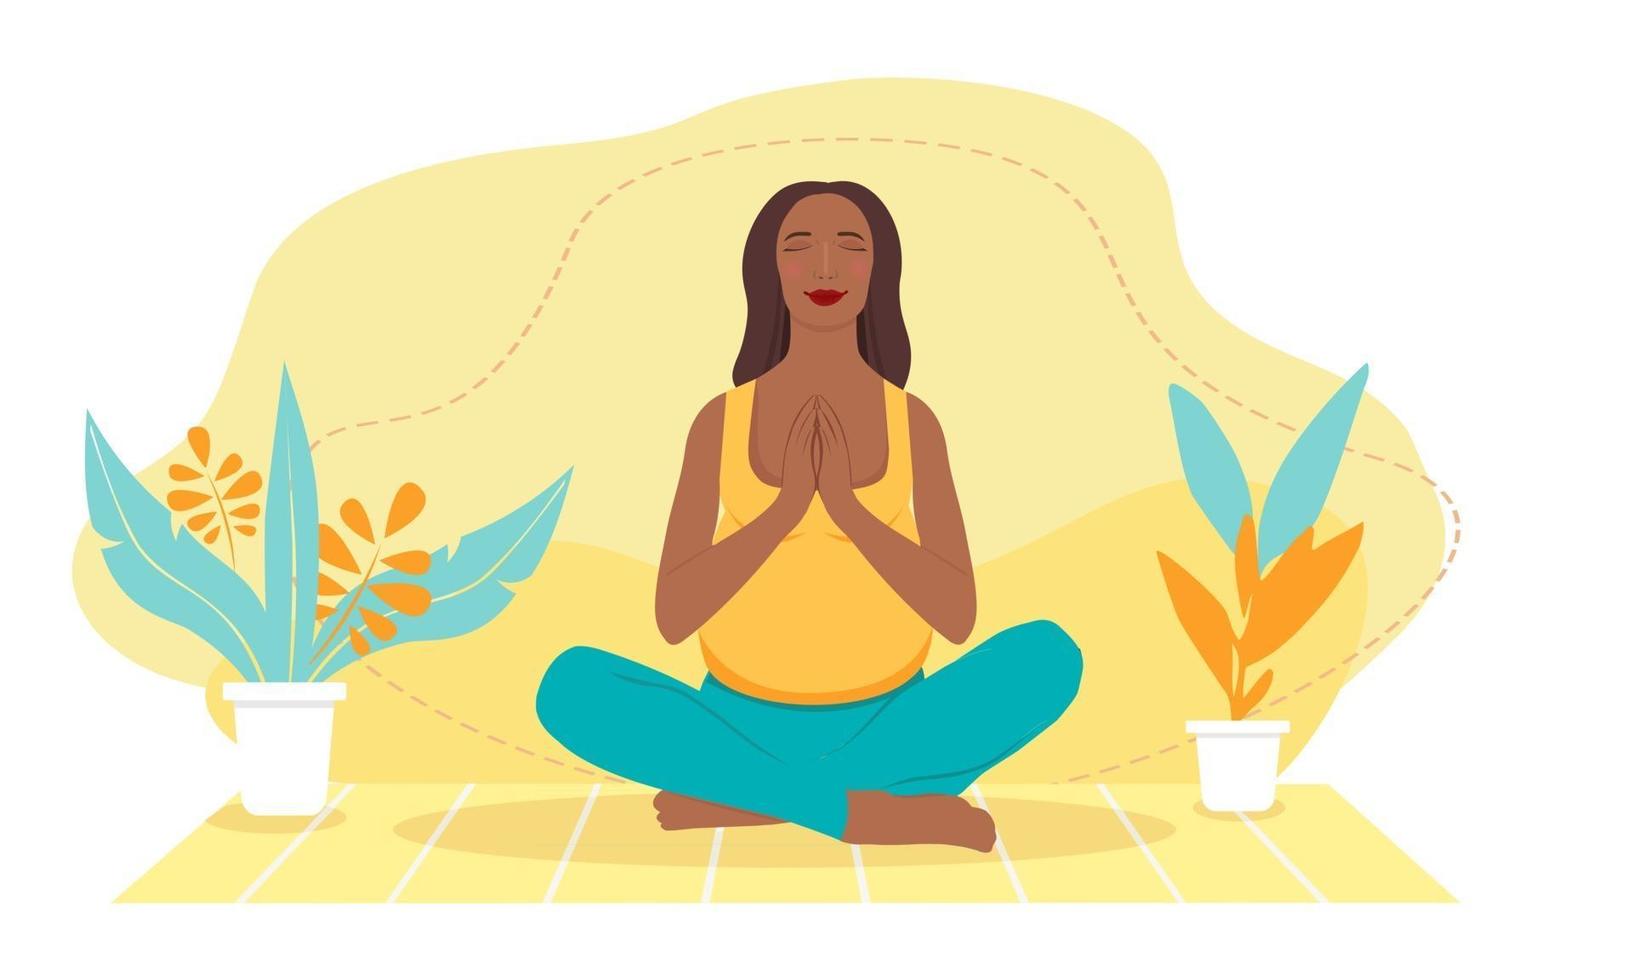 Pregnant dark-skinned woman meditating at home. Concept illustration for prenatal yoga, meditation, relax, recreation, healthy lifestyle. Illustration in flat cartoon style. vector